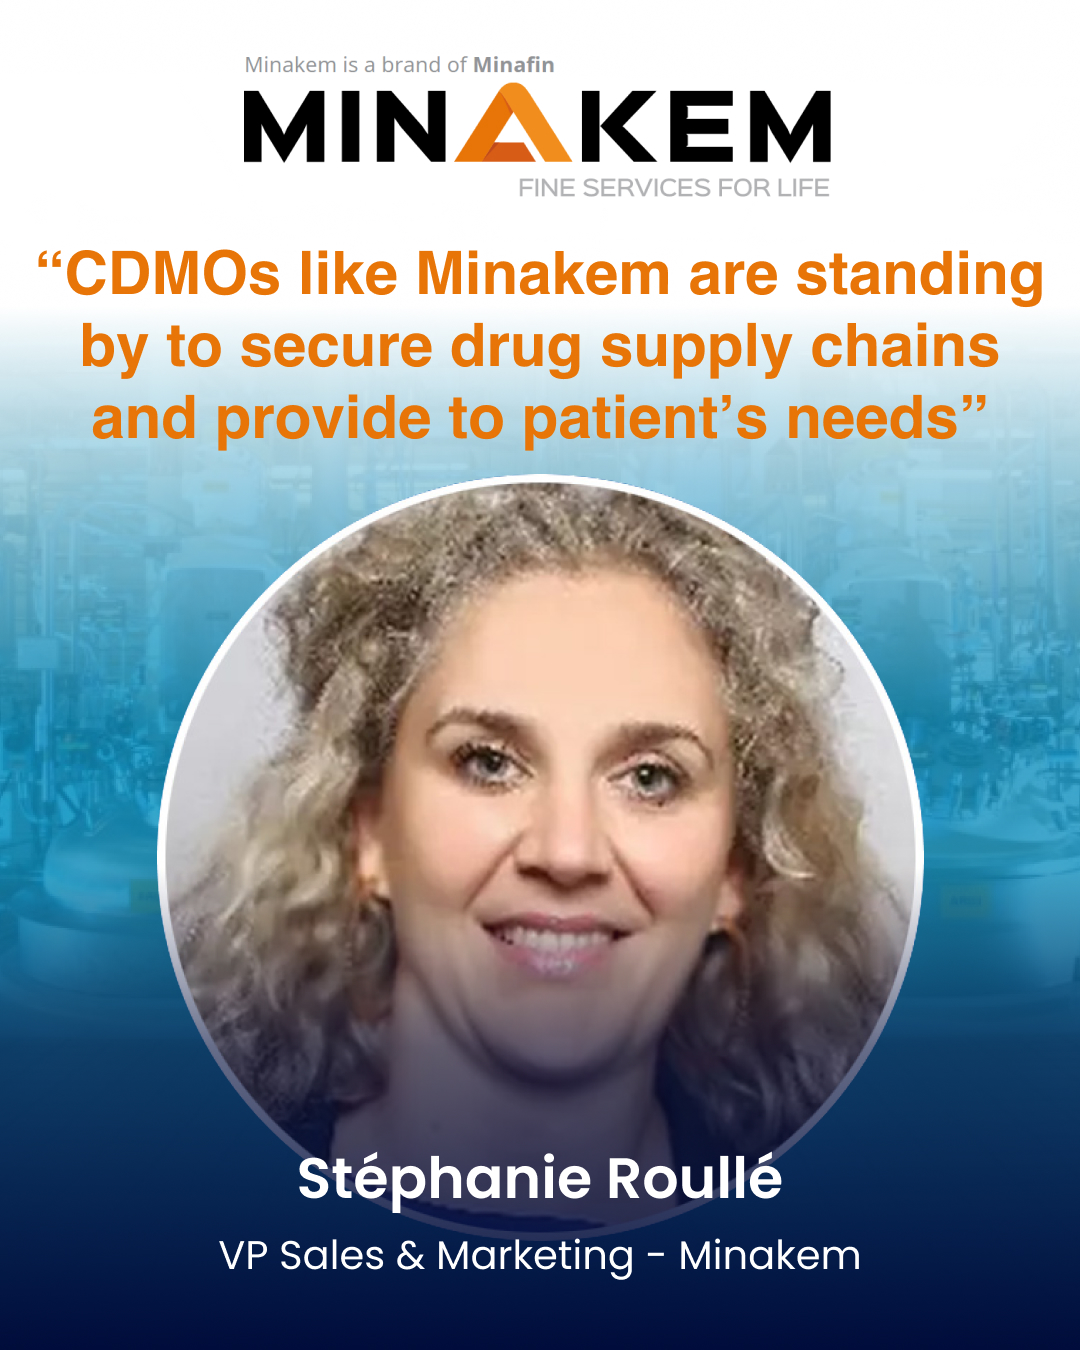 “CDMOs like Minakem are standing by to secure drug supply chains and provide to patient’s needs”